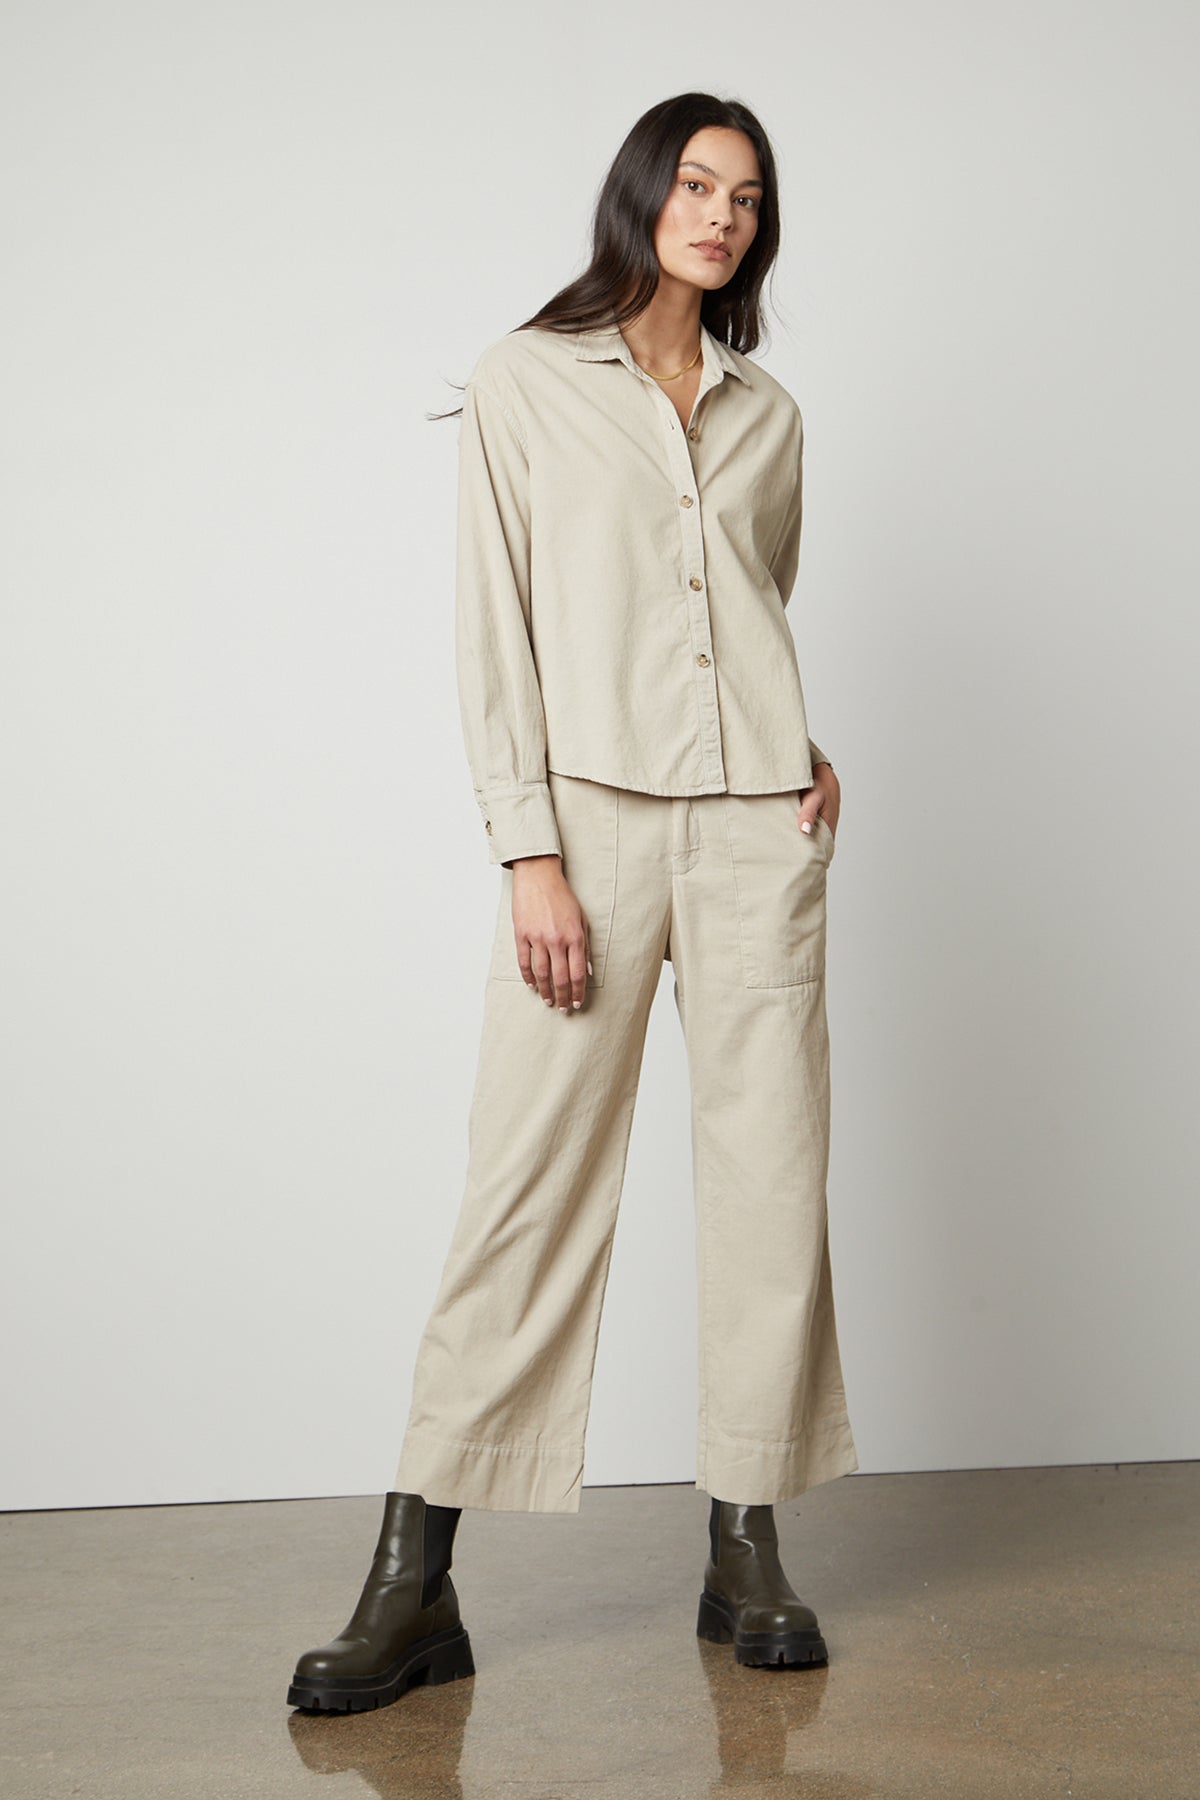   The model is wearing a beige VERA CORDUROY WIDE LEG PANT by Velvet by Graham & Spencer. 